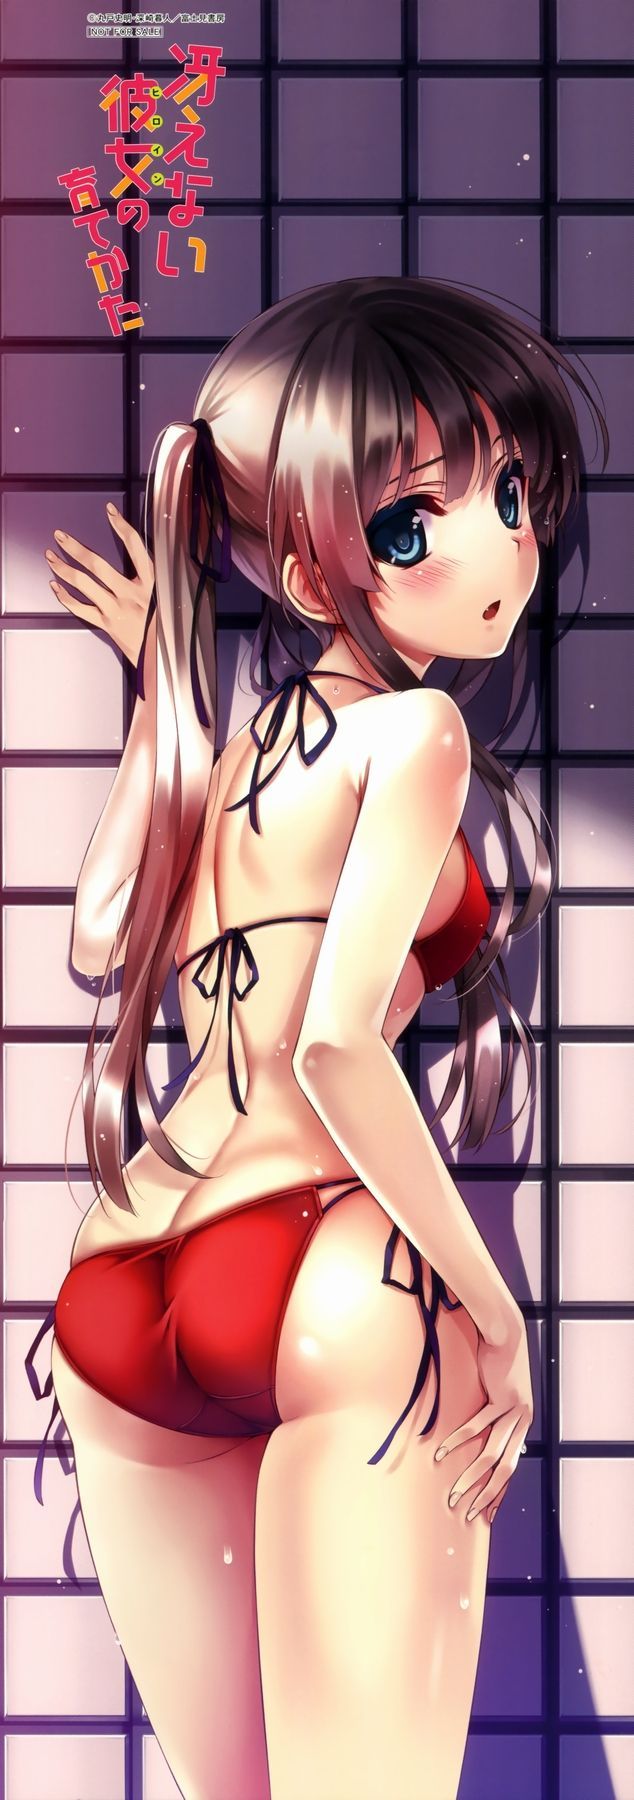 [Secondary swimsuit] dazzling smooth skin, beautiful girl image of swimsuit part 10 7